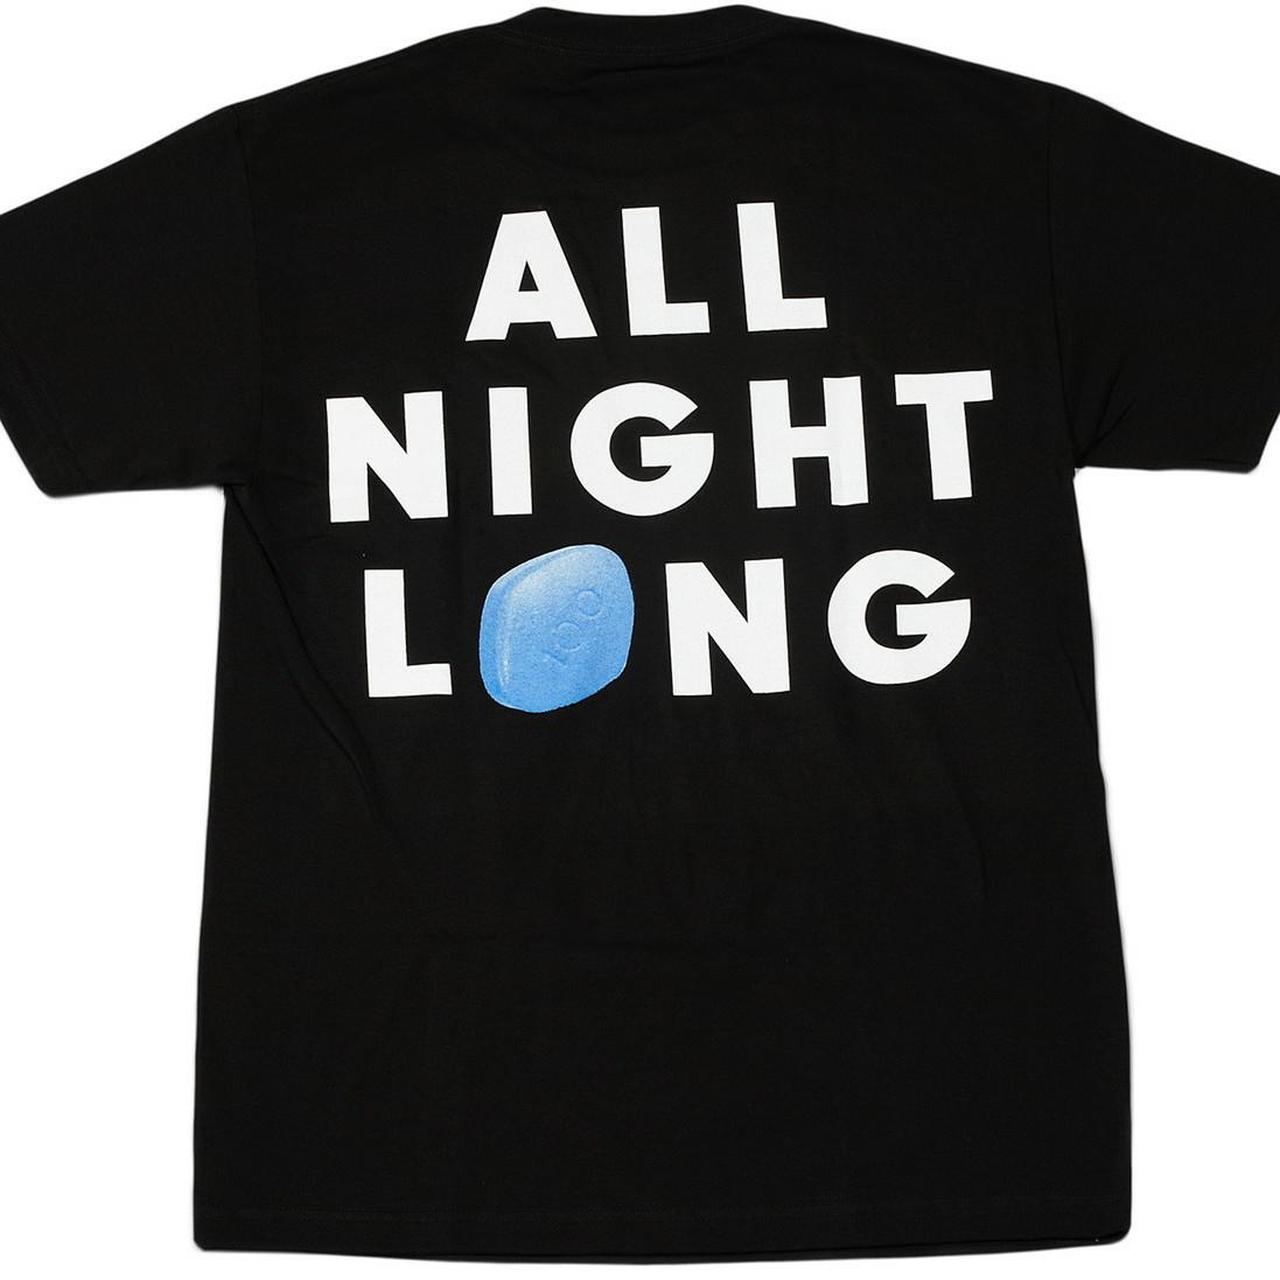 Product Image 1 - PLEASURES ALL NIGHT LONG TEE
FALL